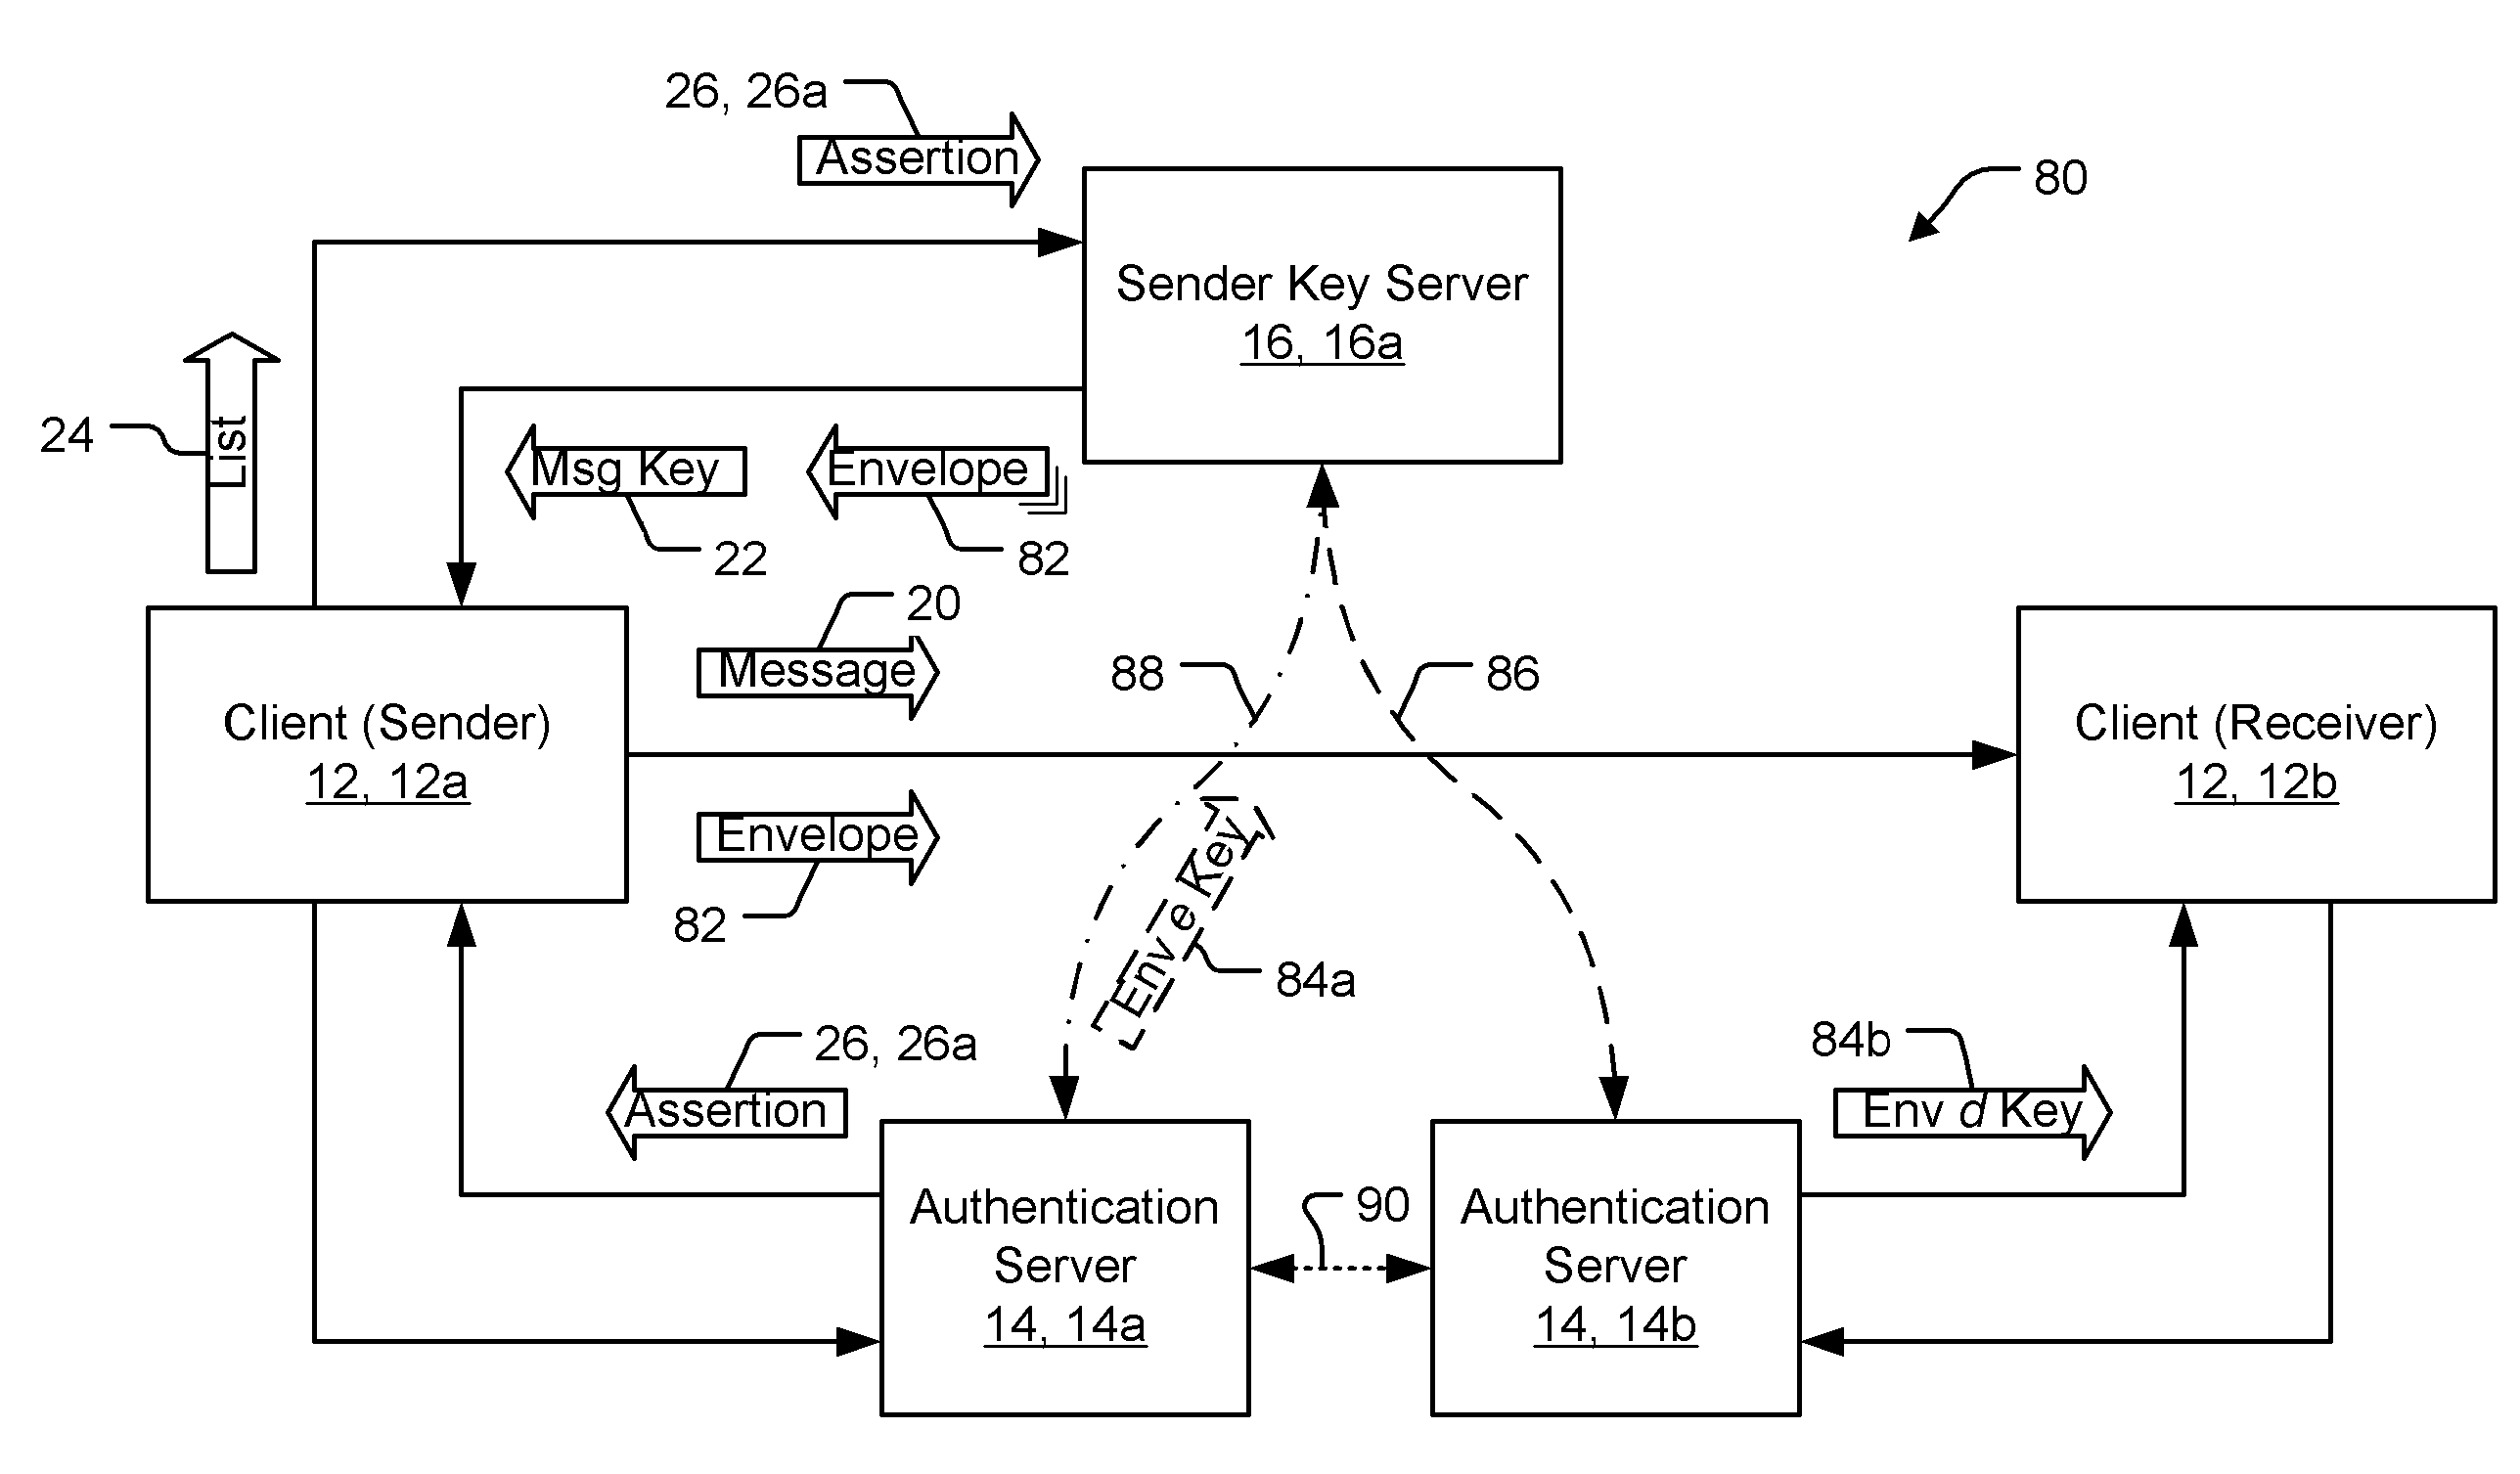 Mediated key exchange between source and target of communication